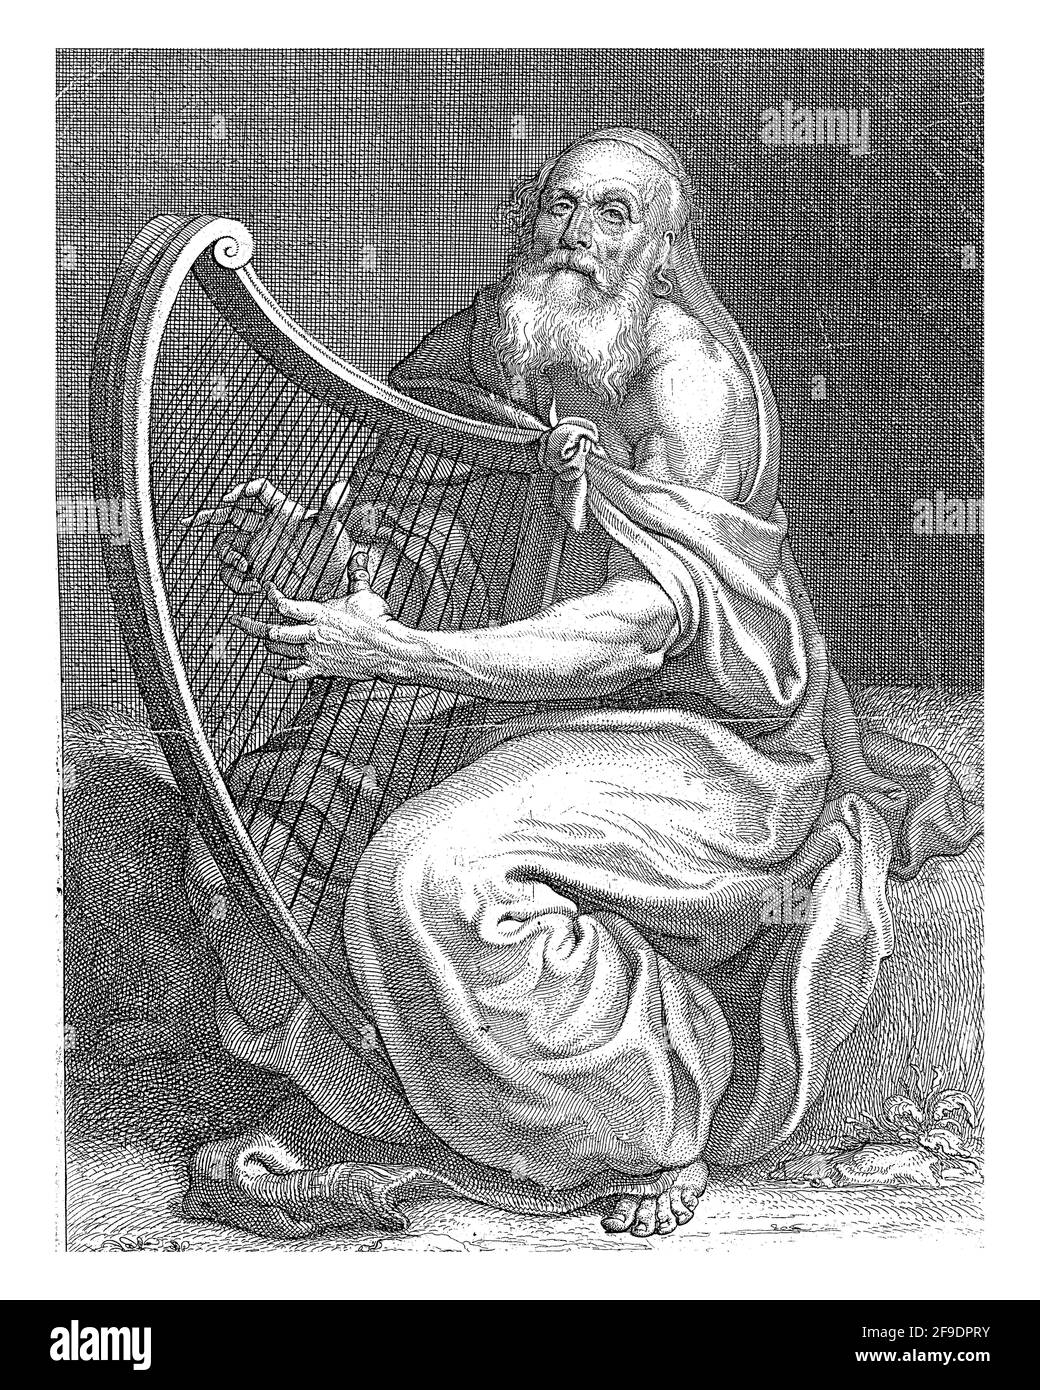 David plays the harp. At the bottom center, in the margin, the coat of arms of Louis Petit and a dedication to him in French. Stock Photo